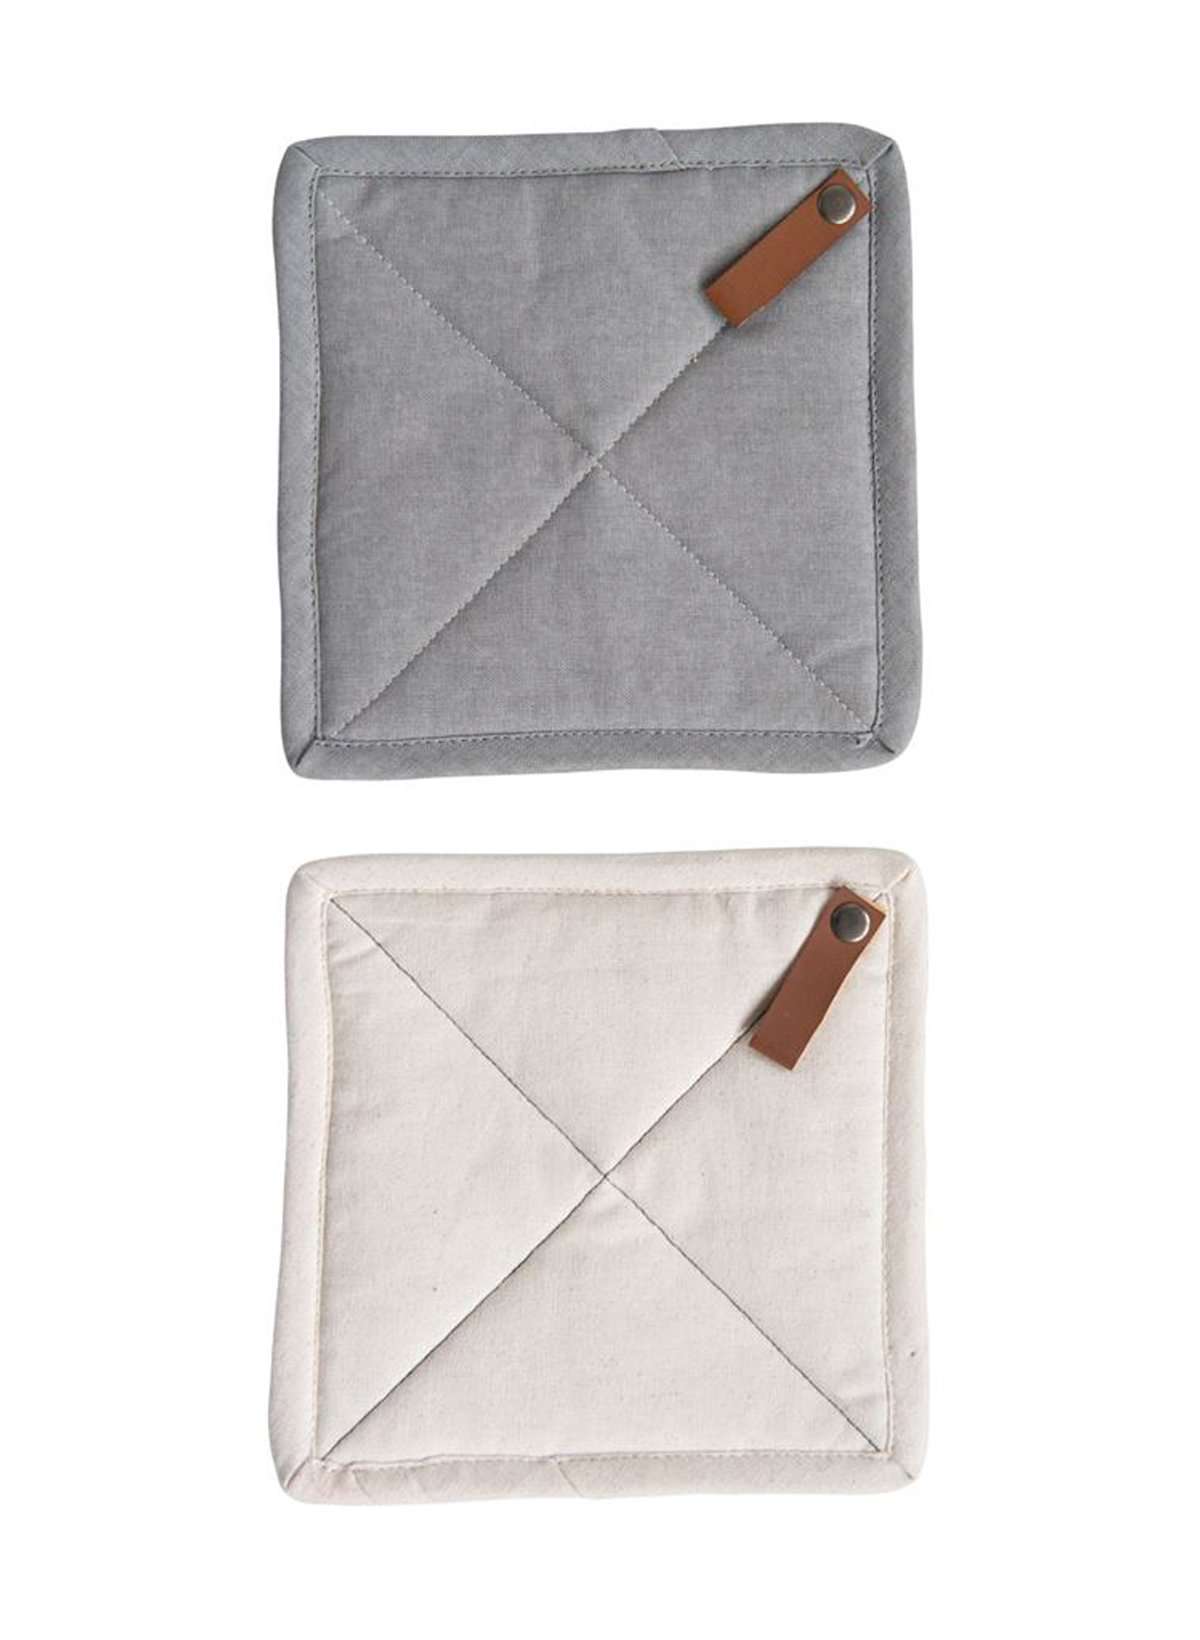 gray and tan quilted pot holder set with leather loop tab